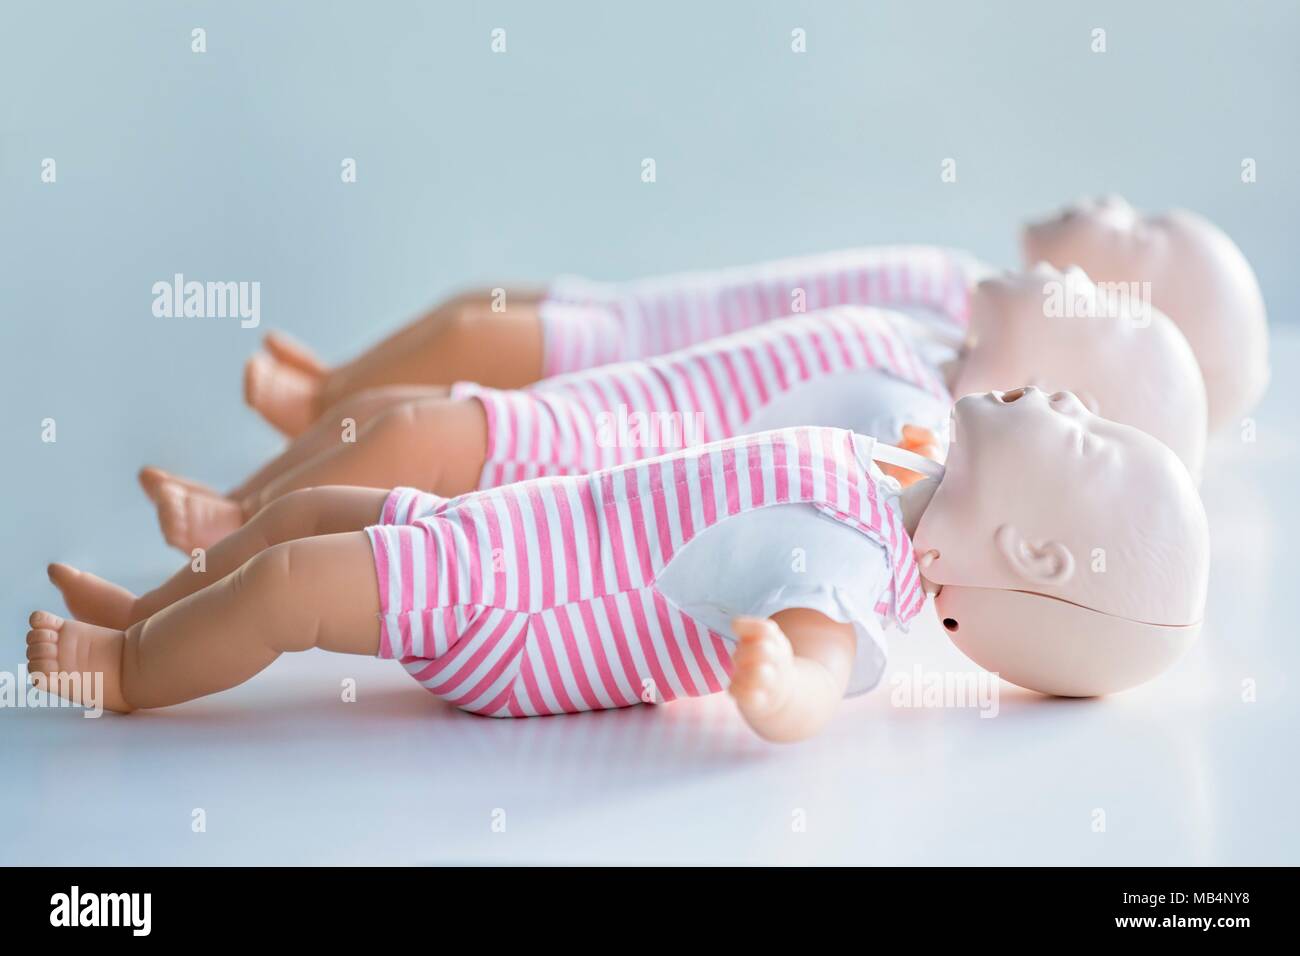 Infant CPR training dummies. Stock Photo